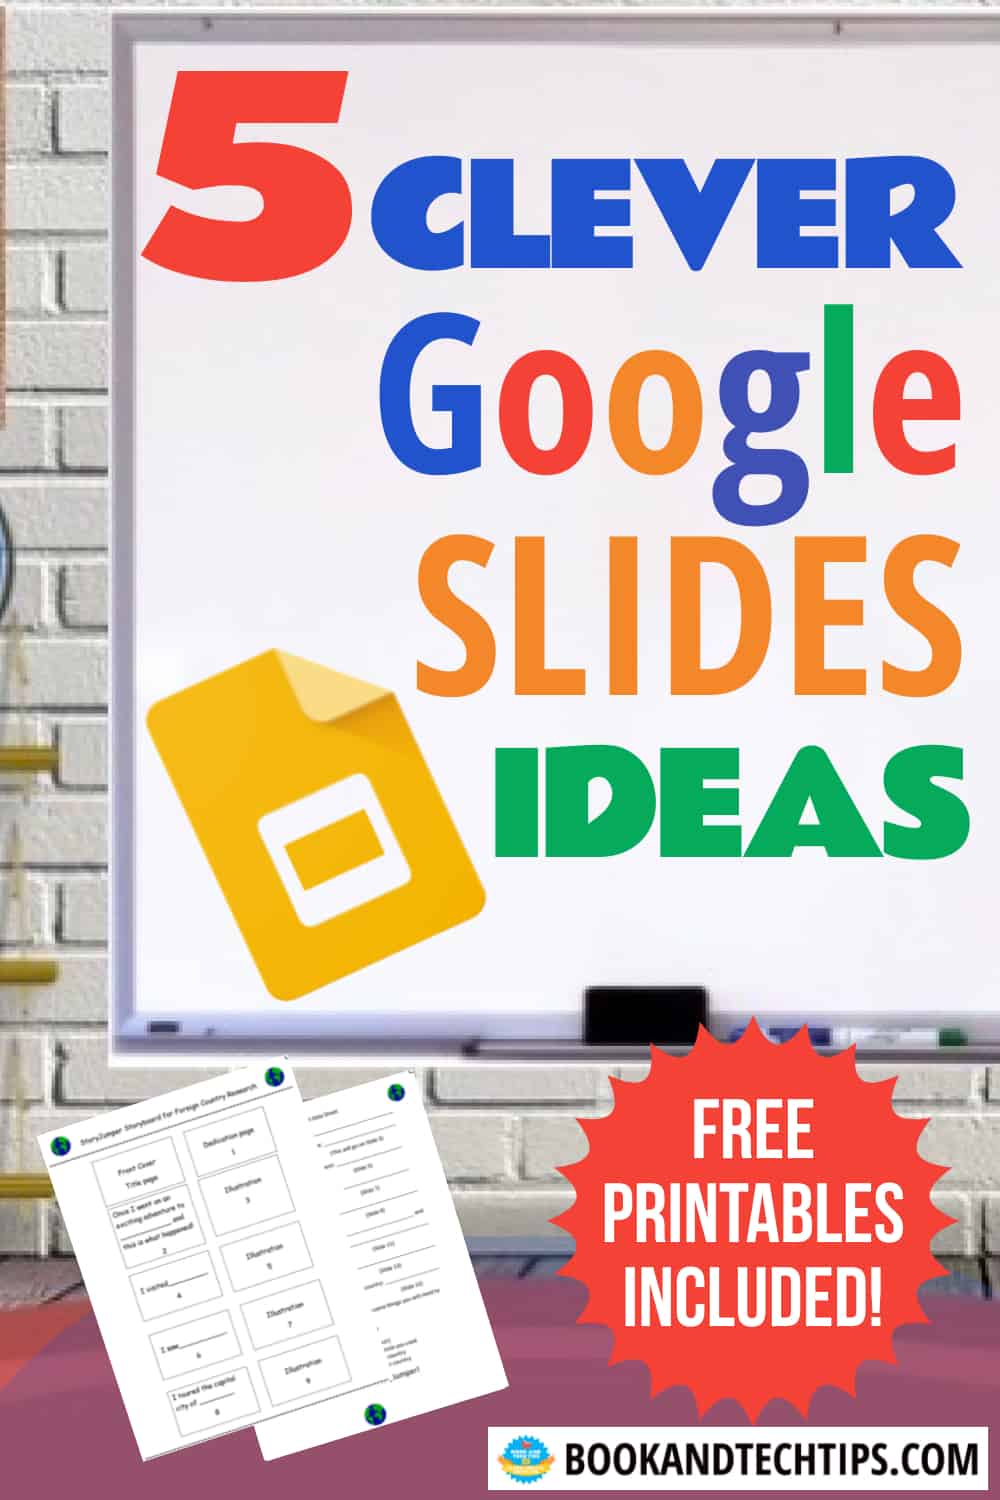 5 clever Google slides ideas with logo